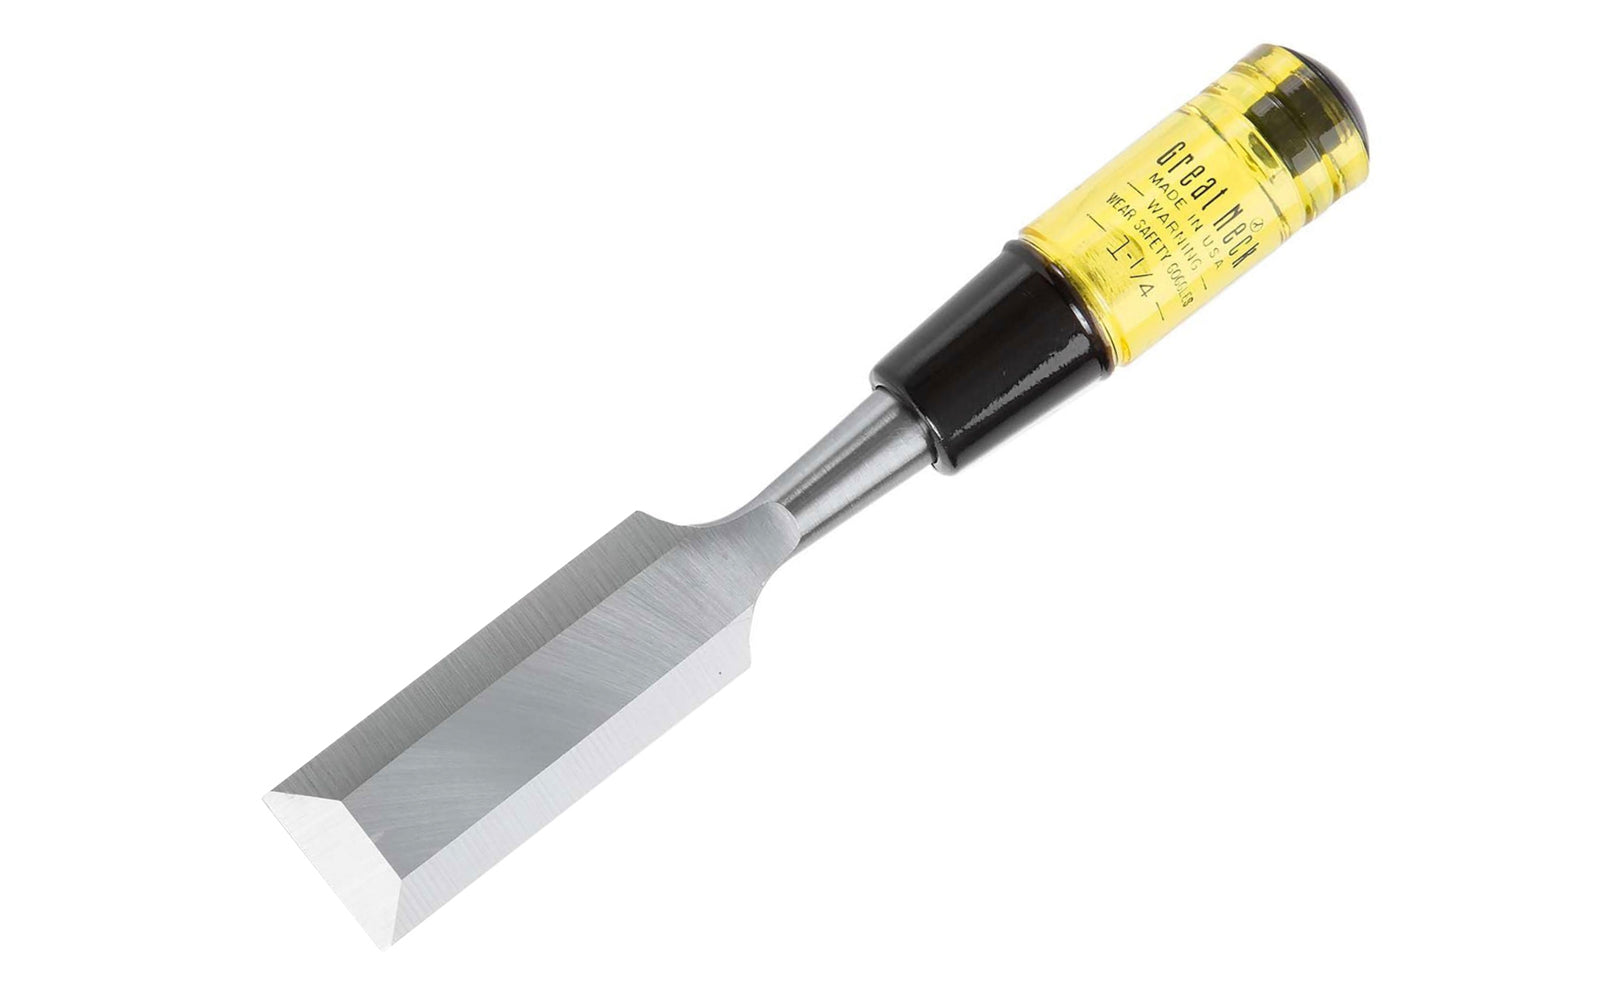 Made in USA 🇺🇲 - GreatNeck 1-1/4" Wood Chisel. 1-1/4" width blade. has a tapered blade of high carbon steel that is hardened & tempered. Acetate handles are shatter-resistant . Great Neck model 1047. 